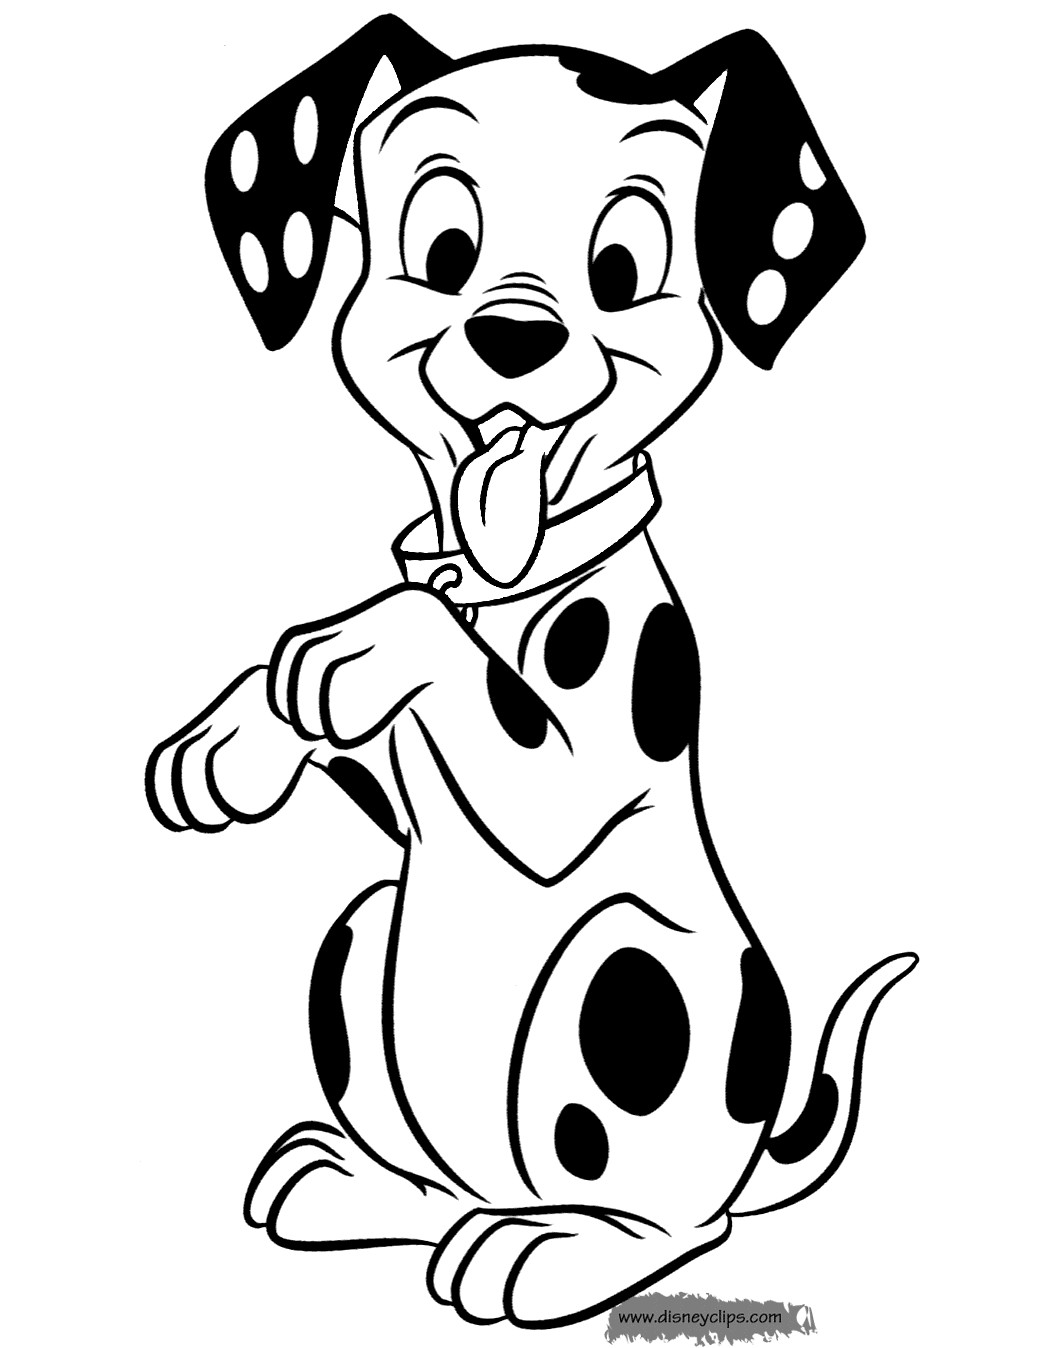 ️101 Dalmation Coloring Pages Free Download Gambr.co